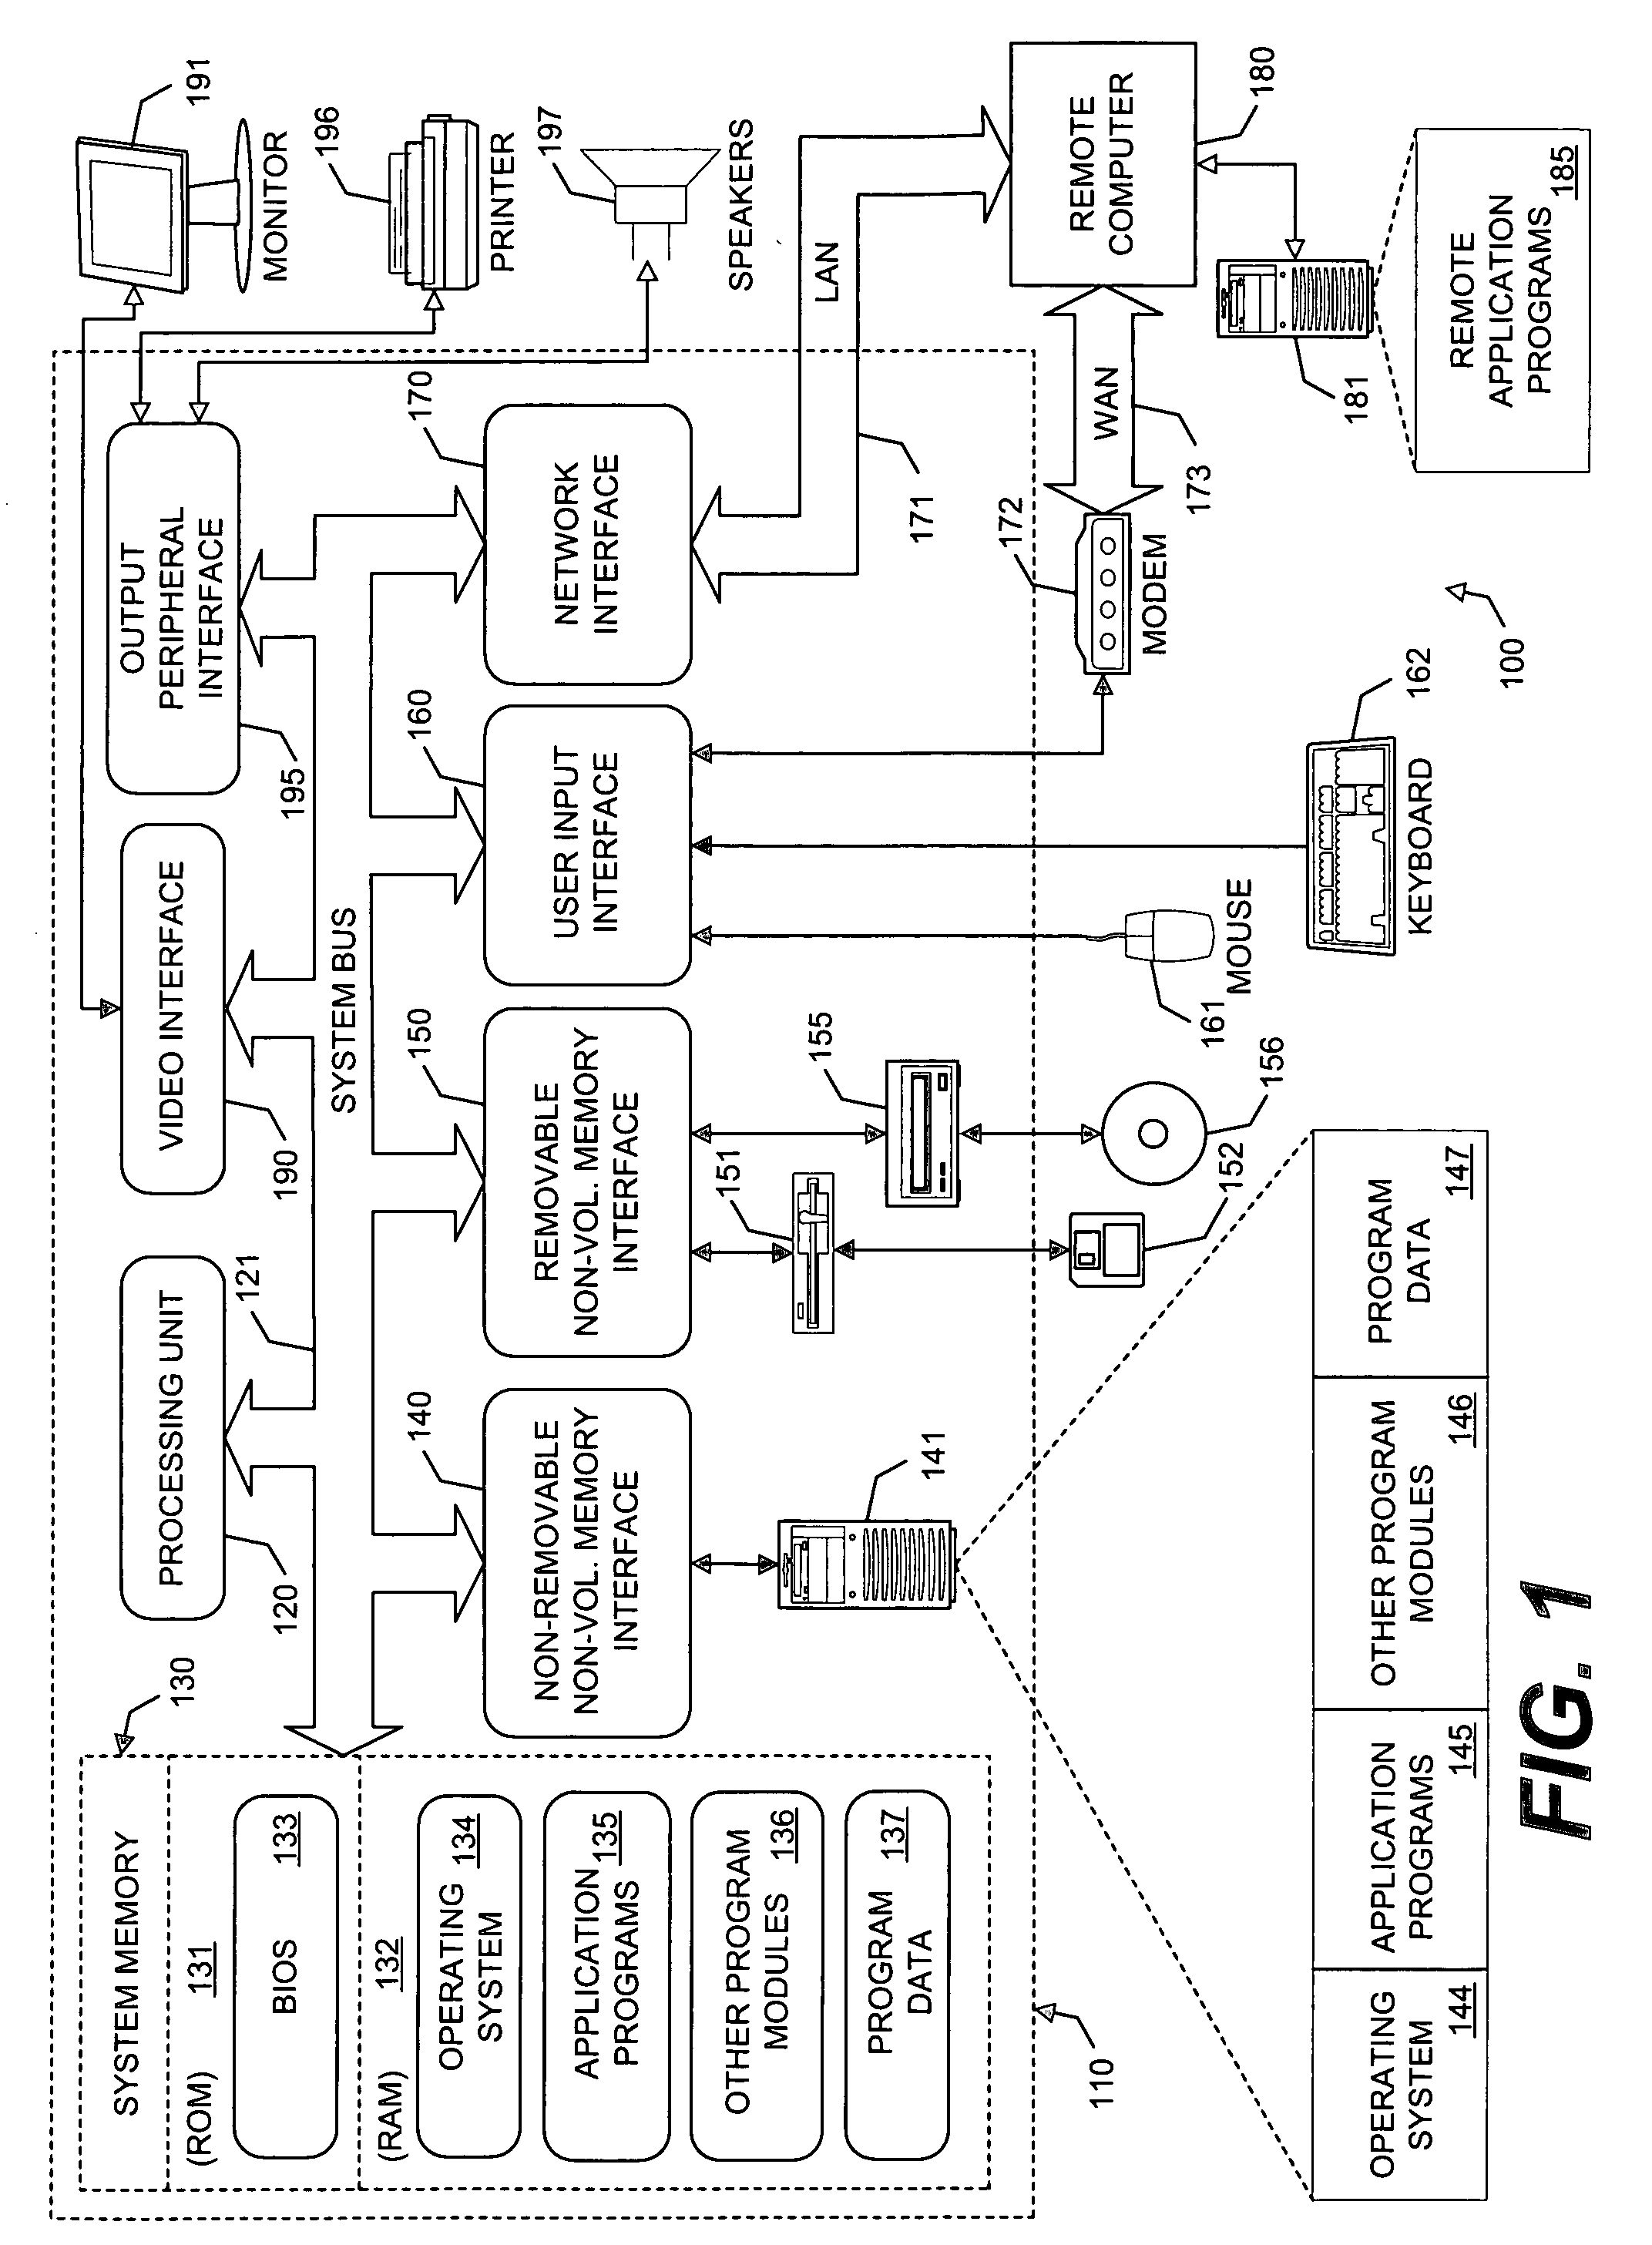 Systems and methods for managing discussion threads based on ratings